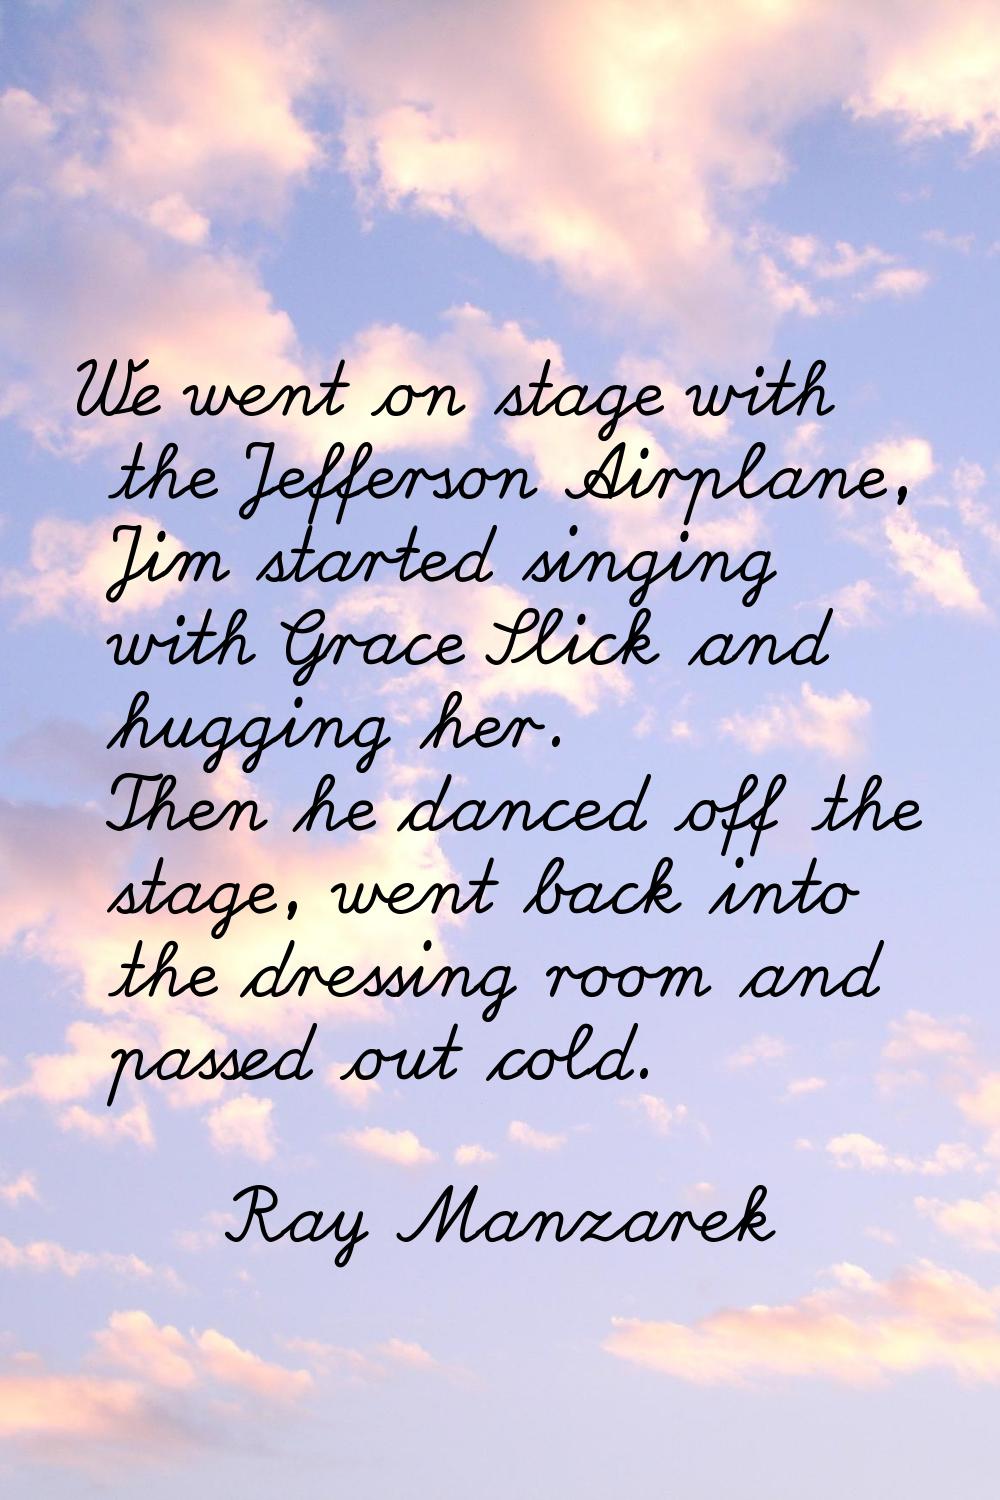 We went on stage with the Jefferson Airplane, Jim started singing with Grace Slick and hugging her.